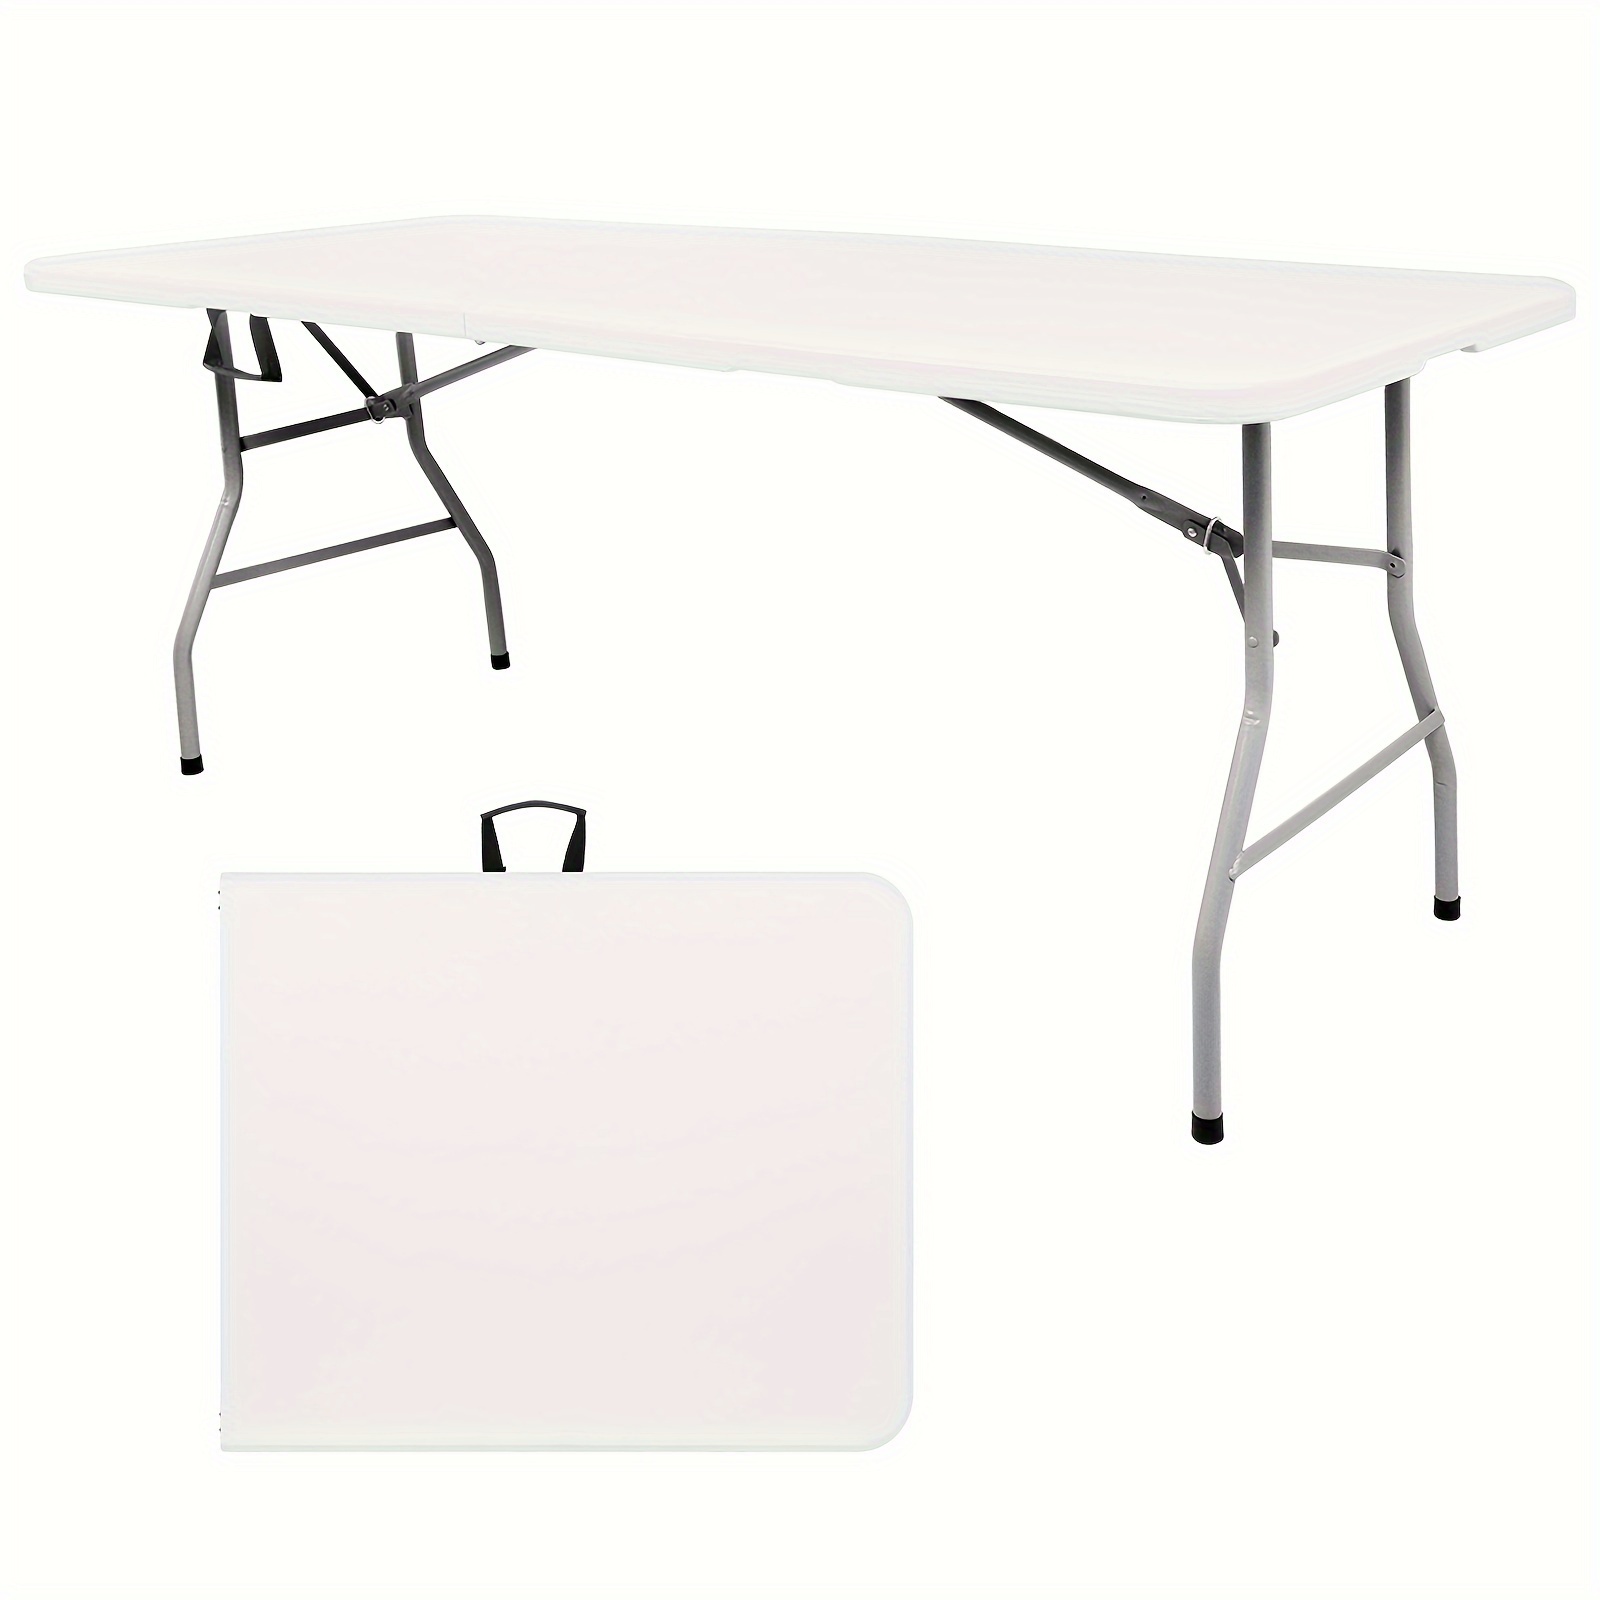 

6ft Plastic Folding Table, Shooting Table, Hdpe Portable Picnic Table Outdoor, For Camping, Party, Wedding, Picnic, With Lock, Handle - White